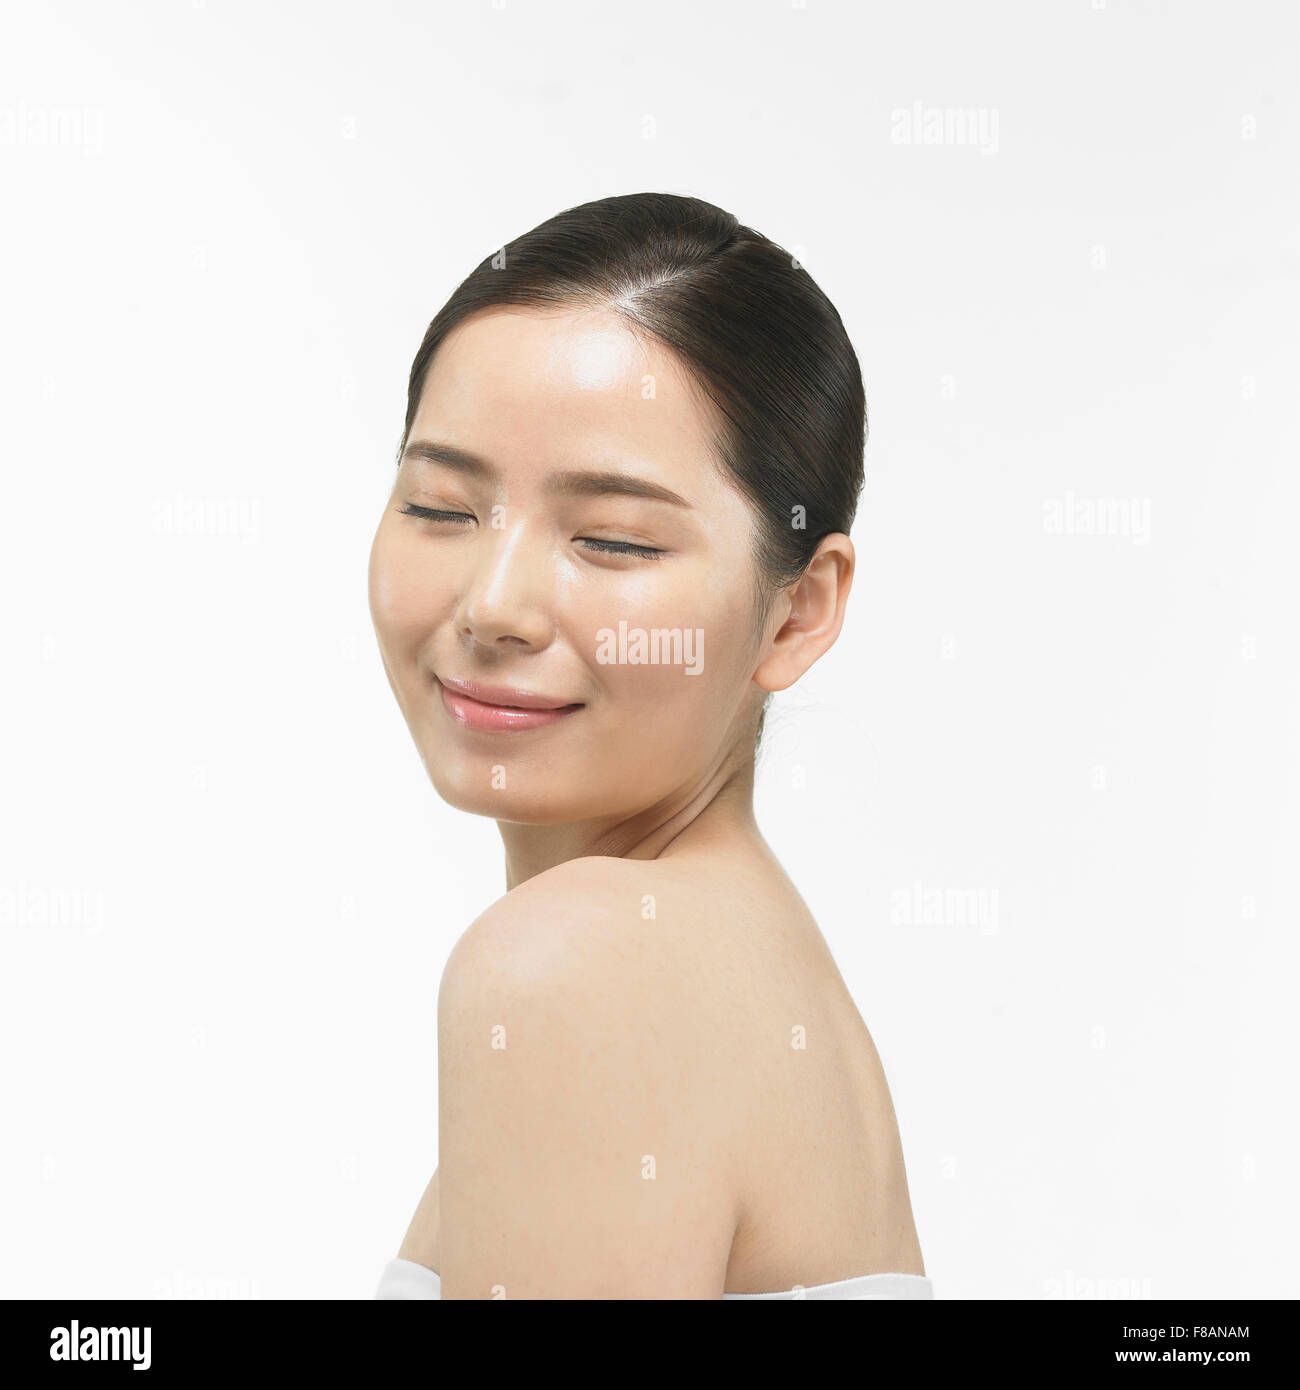 Portrait of Korean woman closing eyes with a smile Stock Photo